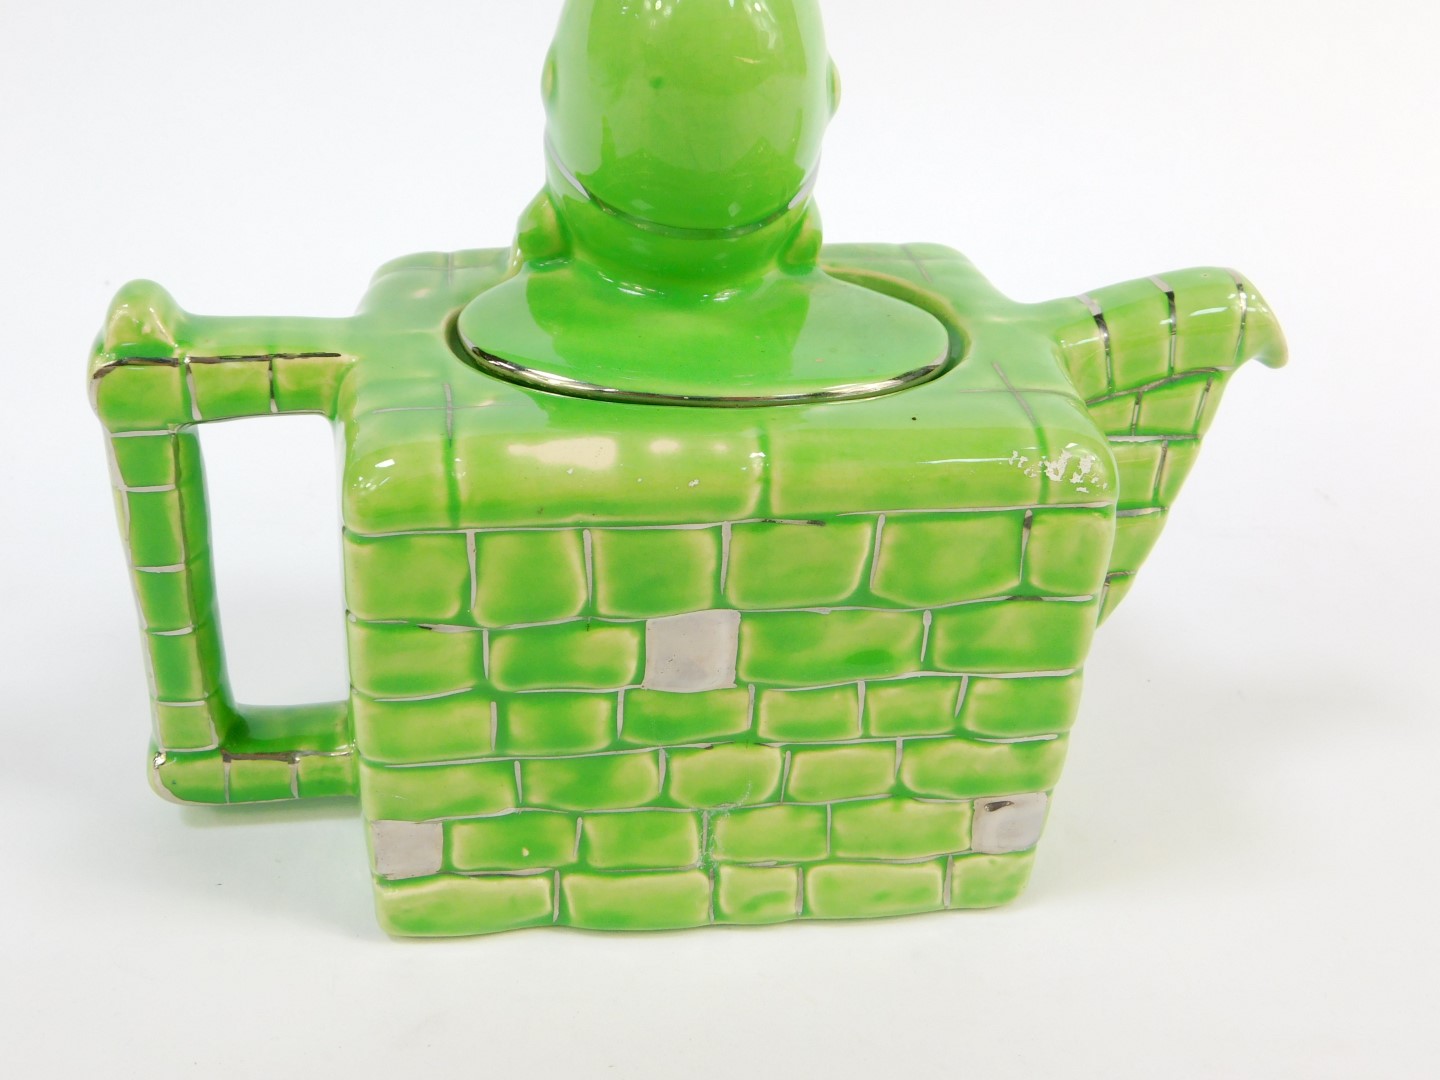 A Lingard pottery teapot modelled as Humpty Dumpty, sitting on the wall, green and silver lustre - Image 3 of 3